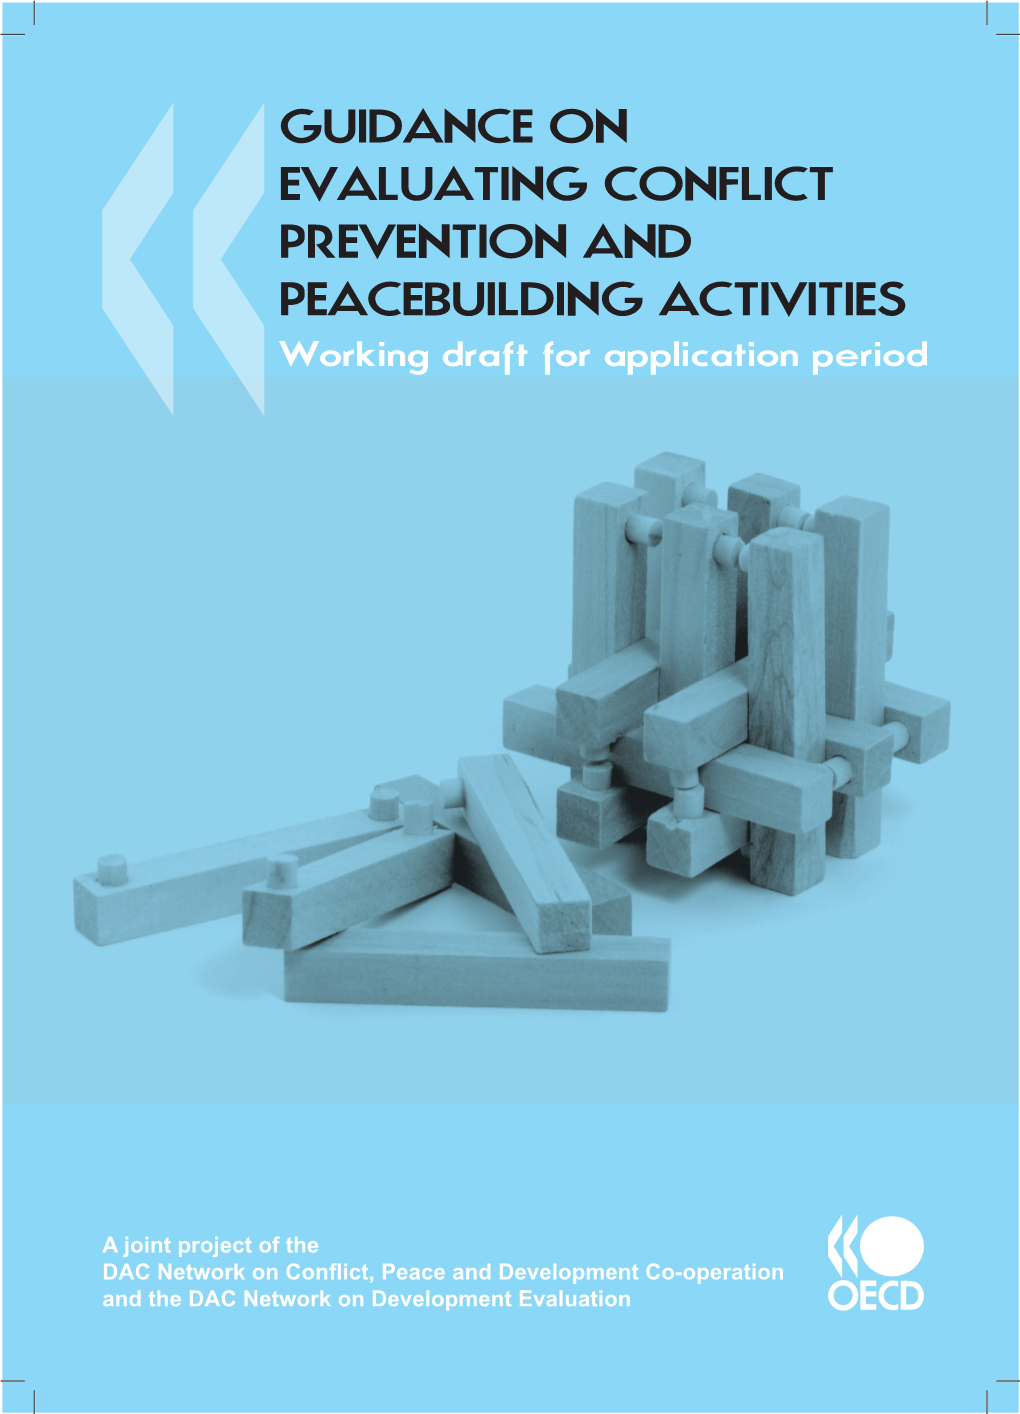 GUIDANCE on EVALUATING CONFLICT PREVENTION and PEACEBUILDING ACTIVITIES Working Draft for Application Period